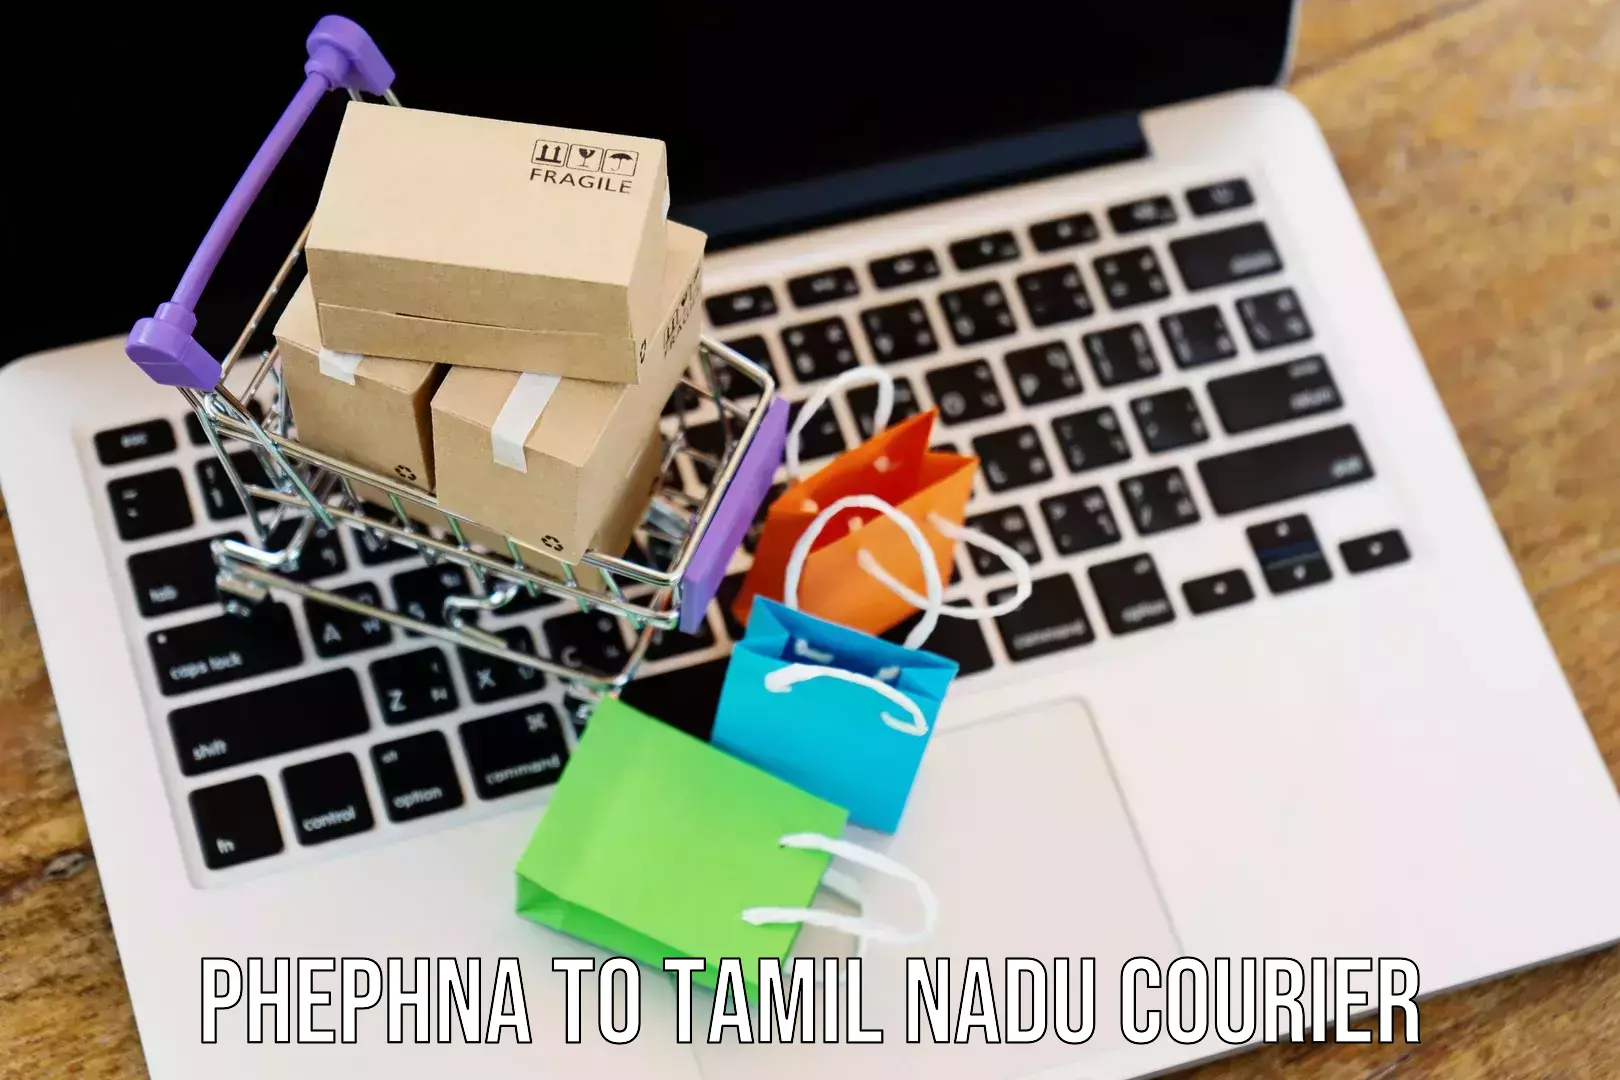 State-of-the-art courier technology in Phephna to Tamil Nadu